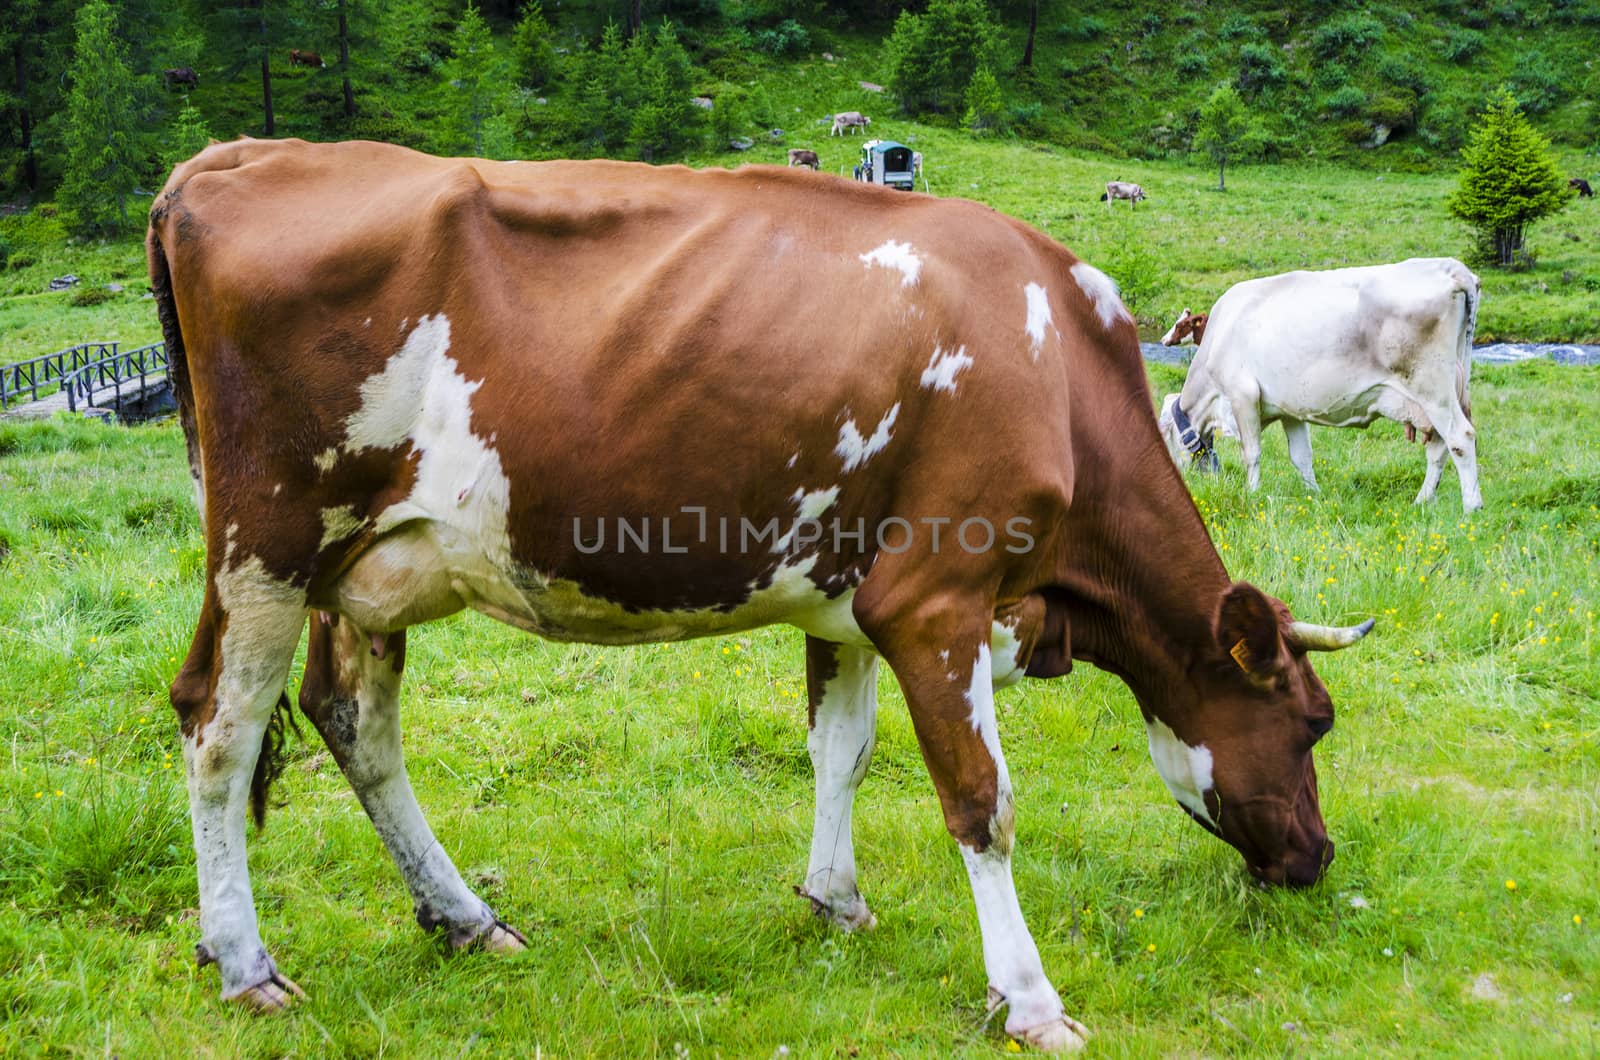 Two cows grazing on an alpine meadow